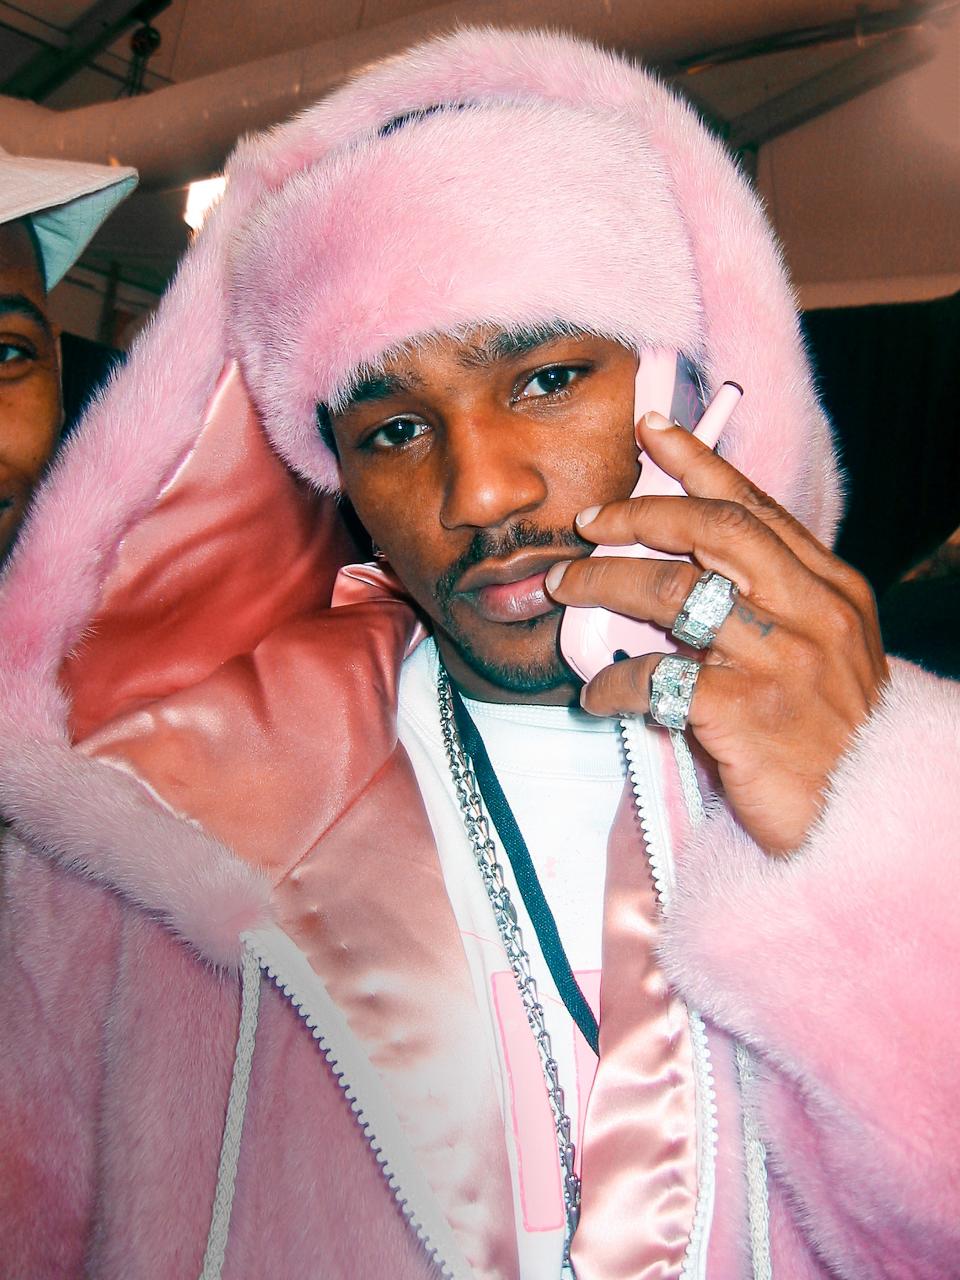 CAM'RON
Pink mink
New York City, 2003
The flip phone might look dated, but the pink mink makes this an iconic fit.